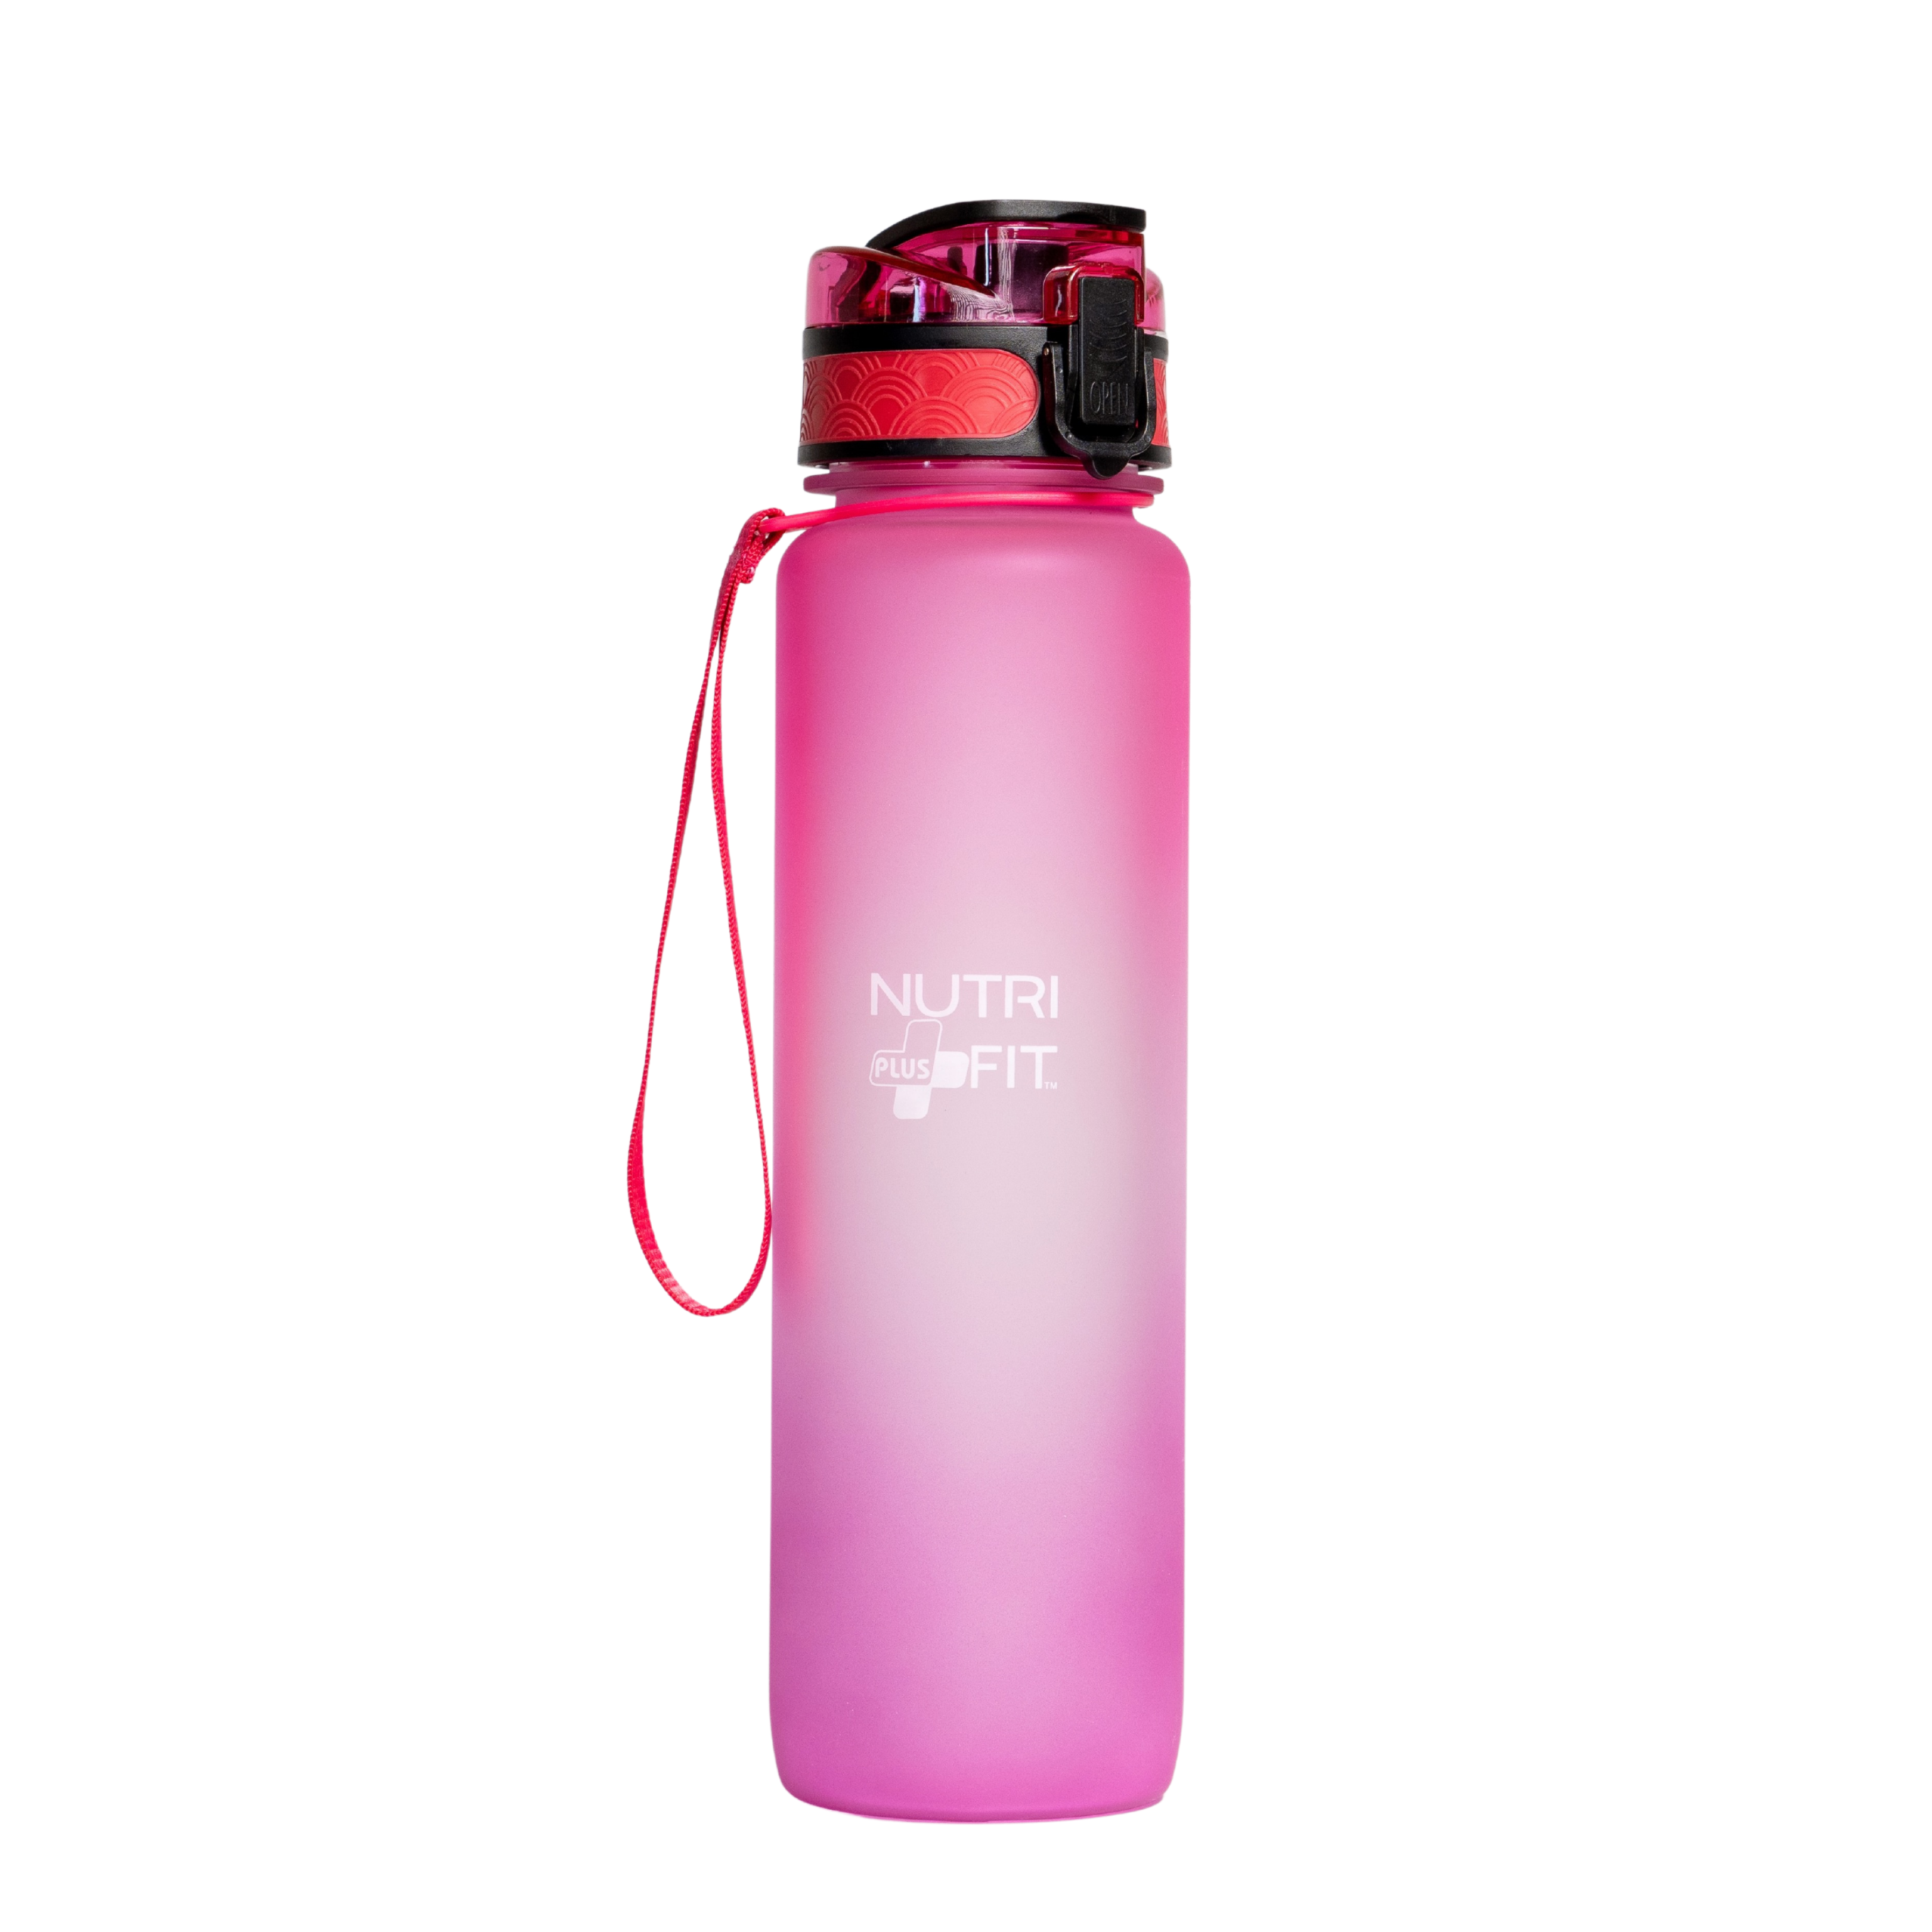 NutriFit Plus Hydration Water Bottle for everyday use 32oz - BPA Free - Leak Proof System - Time Markers - Multi Colors